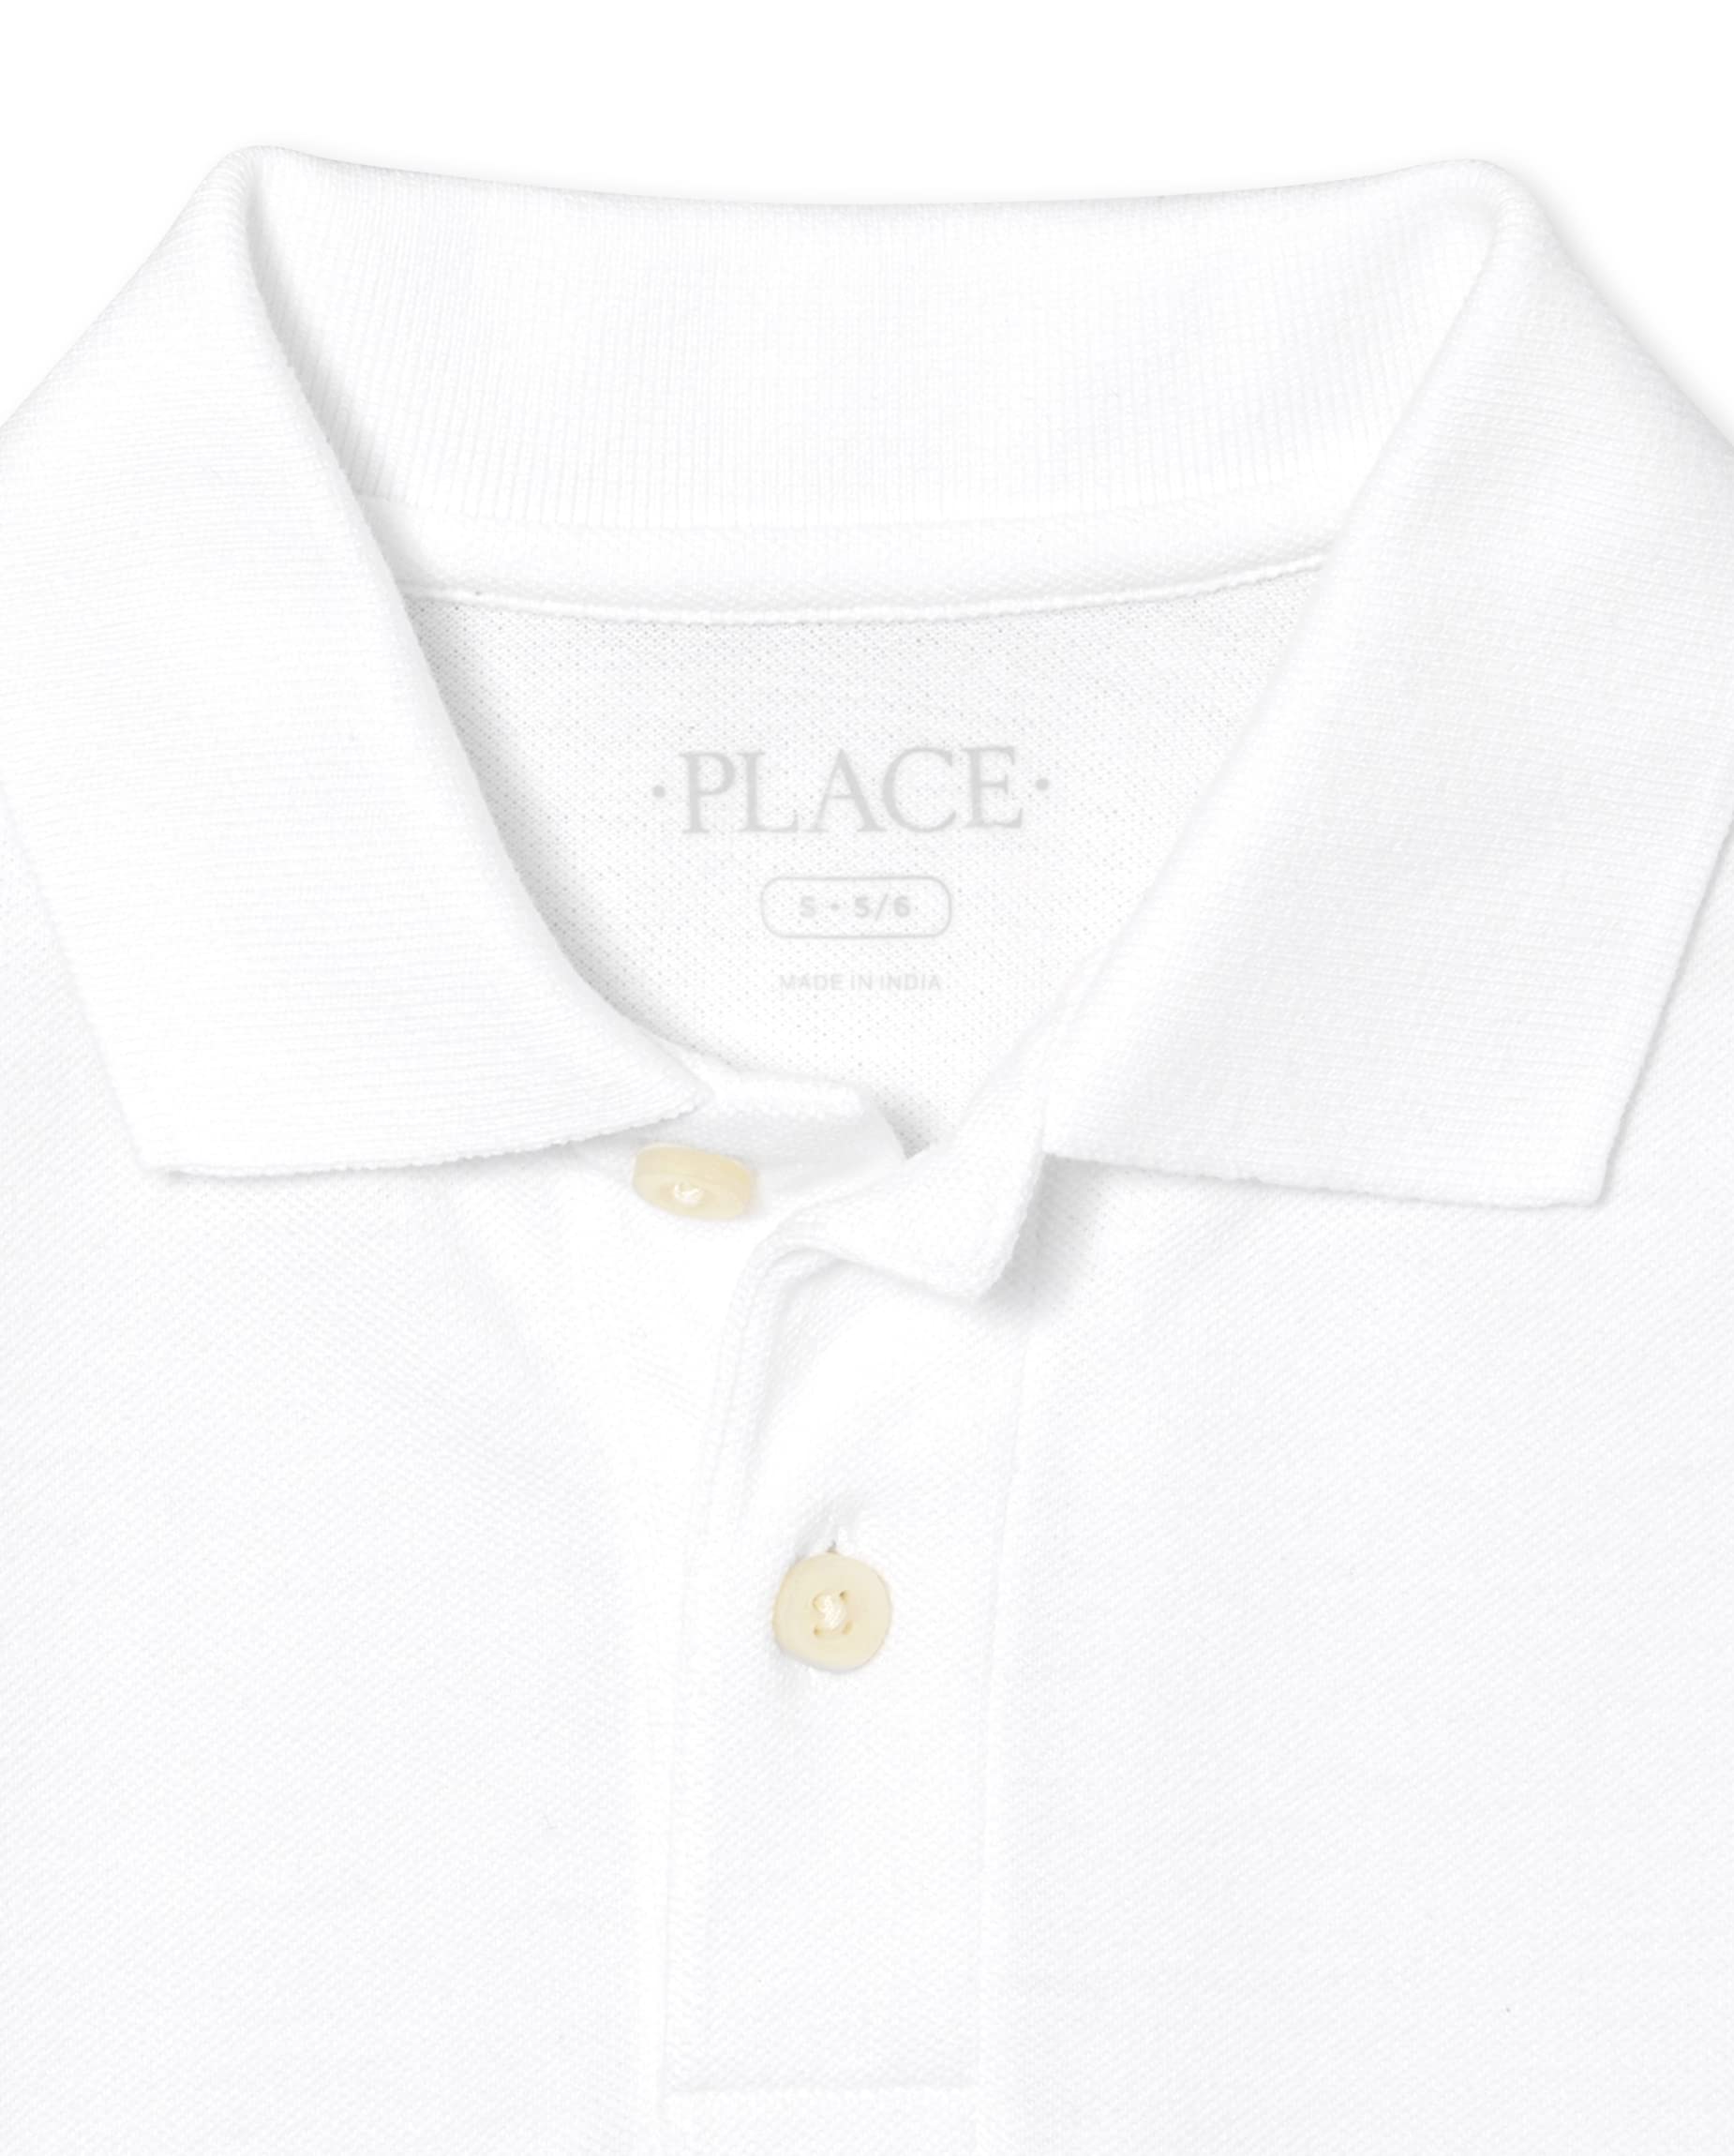 The Children's Place Boys' Multipack Short Sleeve Pique Polos